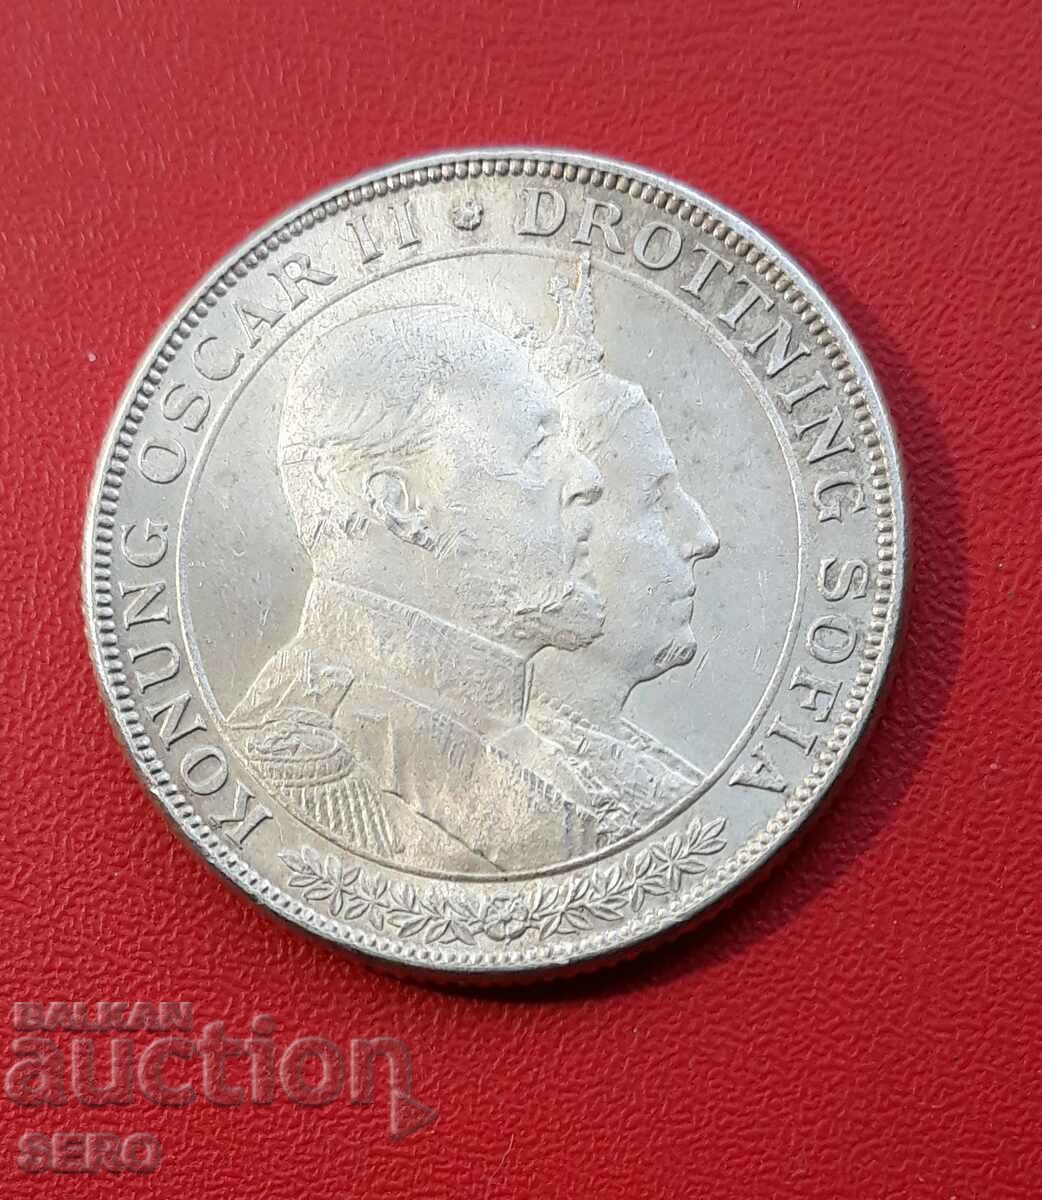 Sweden-2 kroner 1907-silver, rare and very well preserved